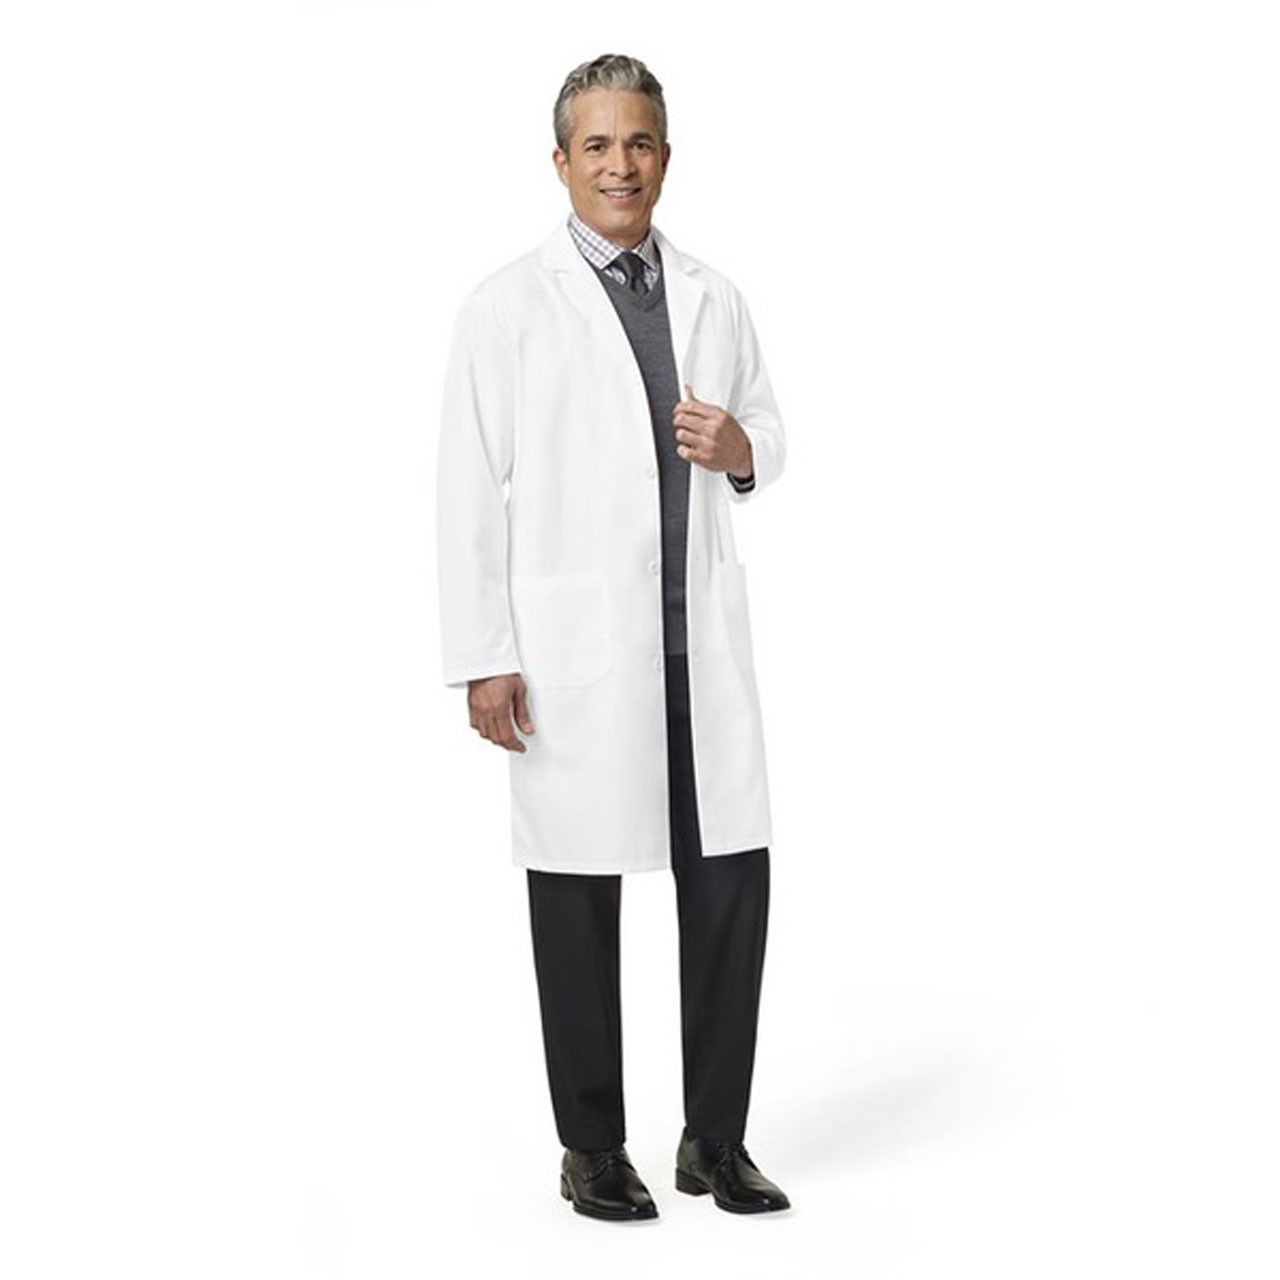 Is the combination lab coat from Fashion Seal individually packaged?